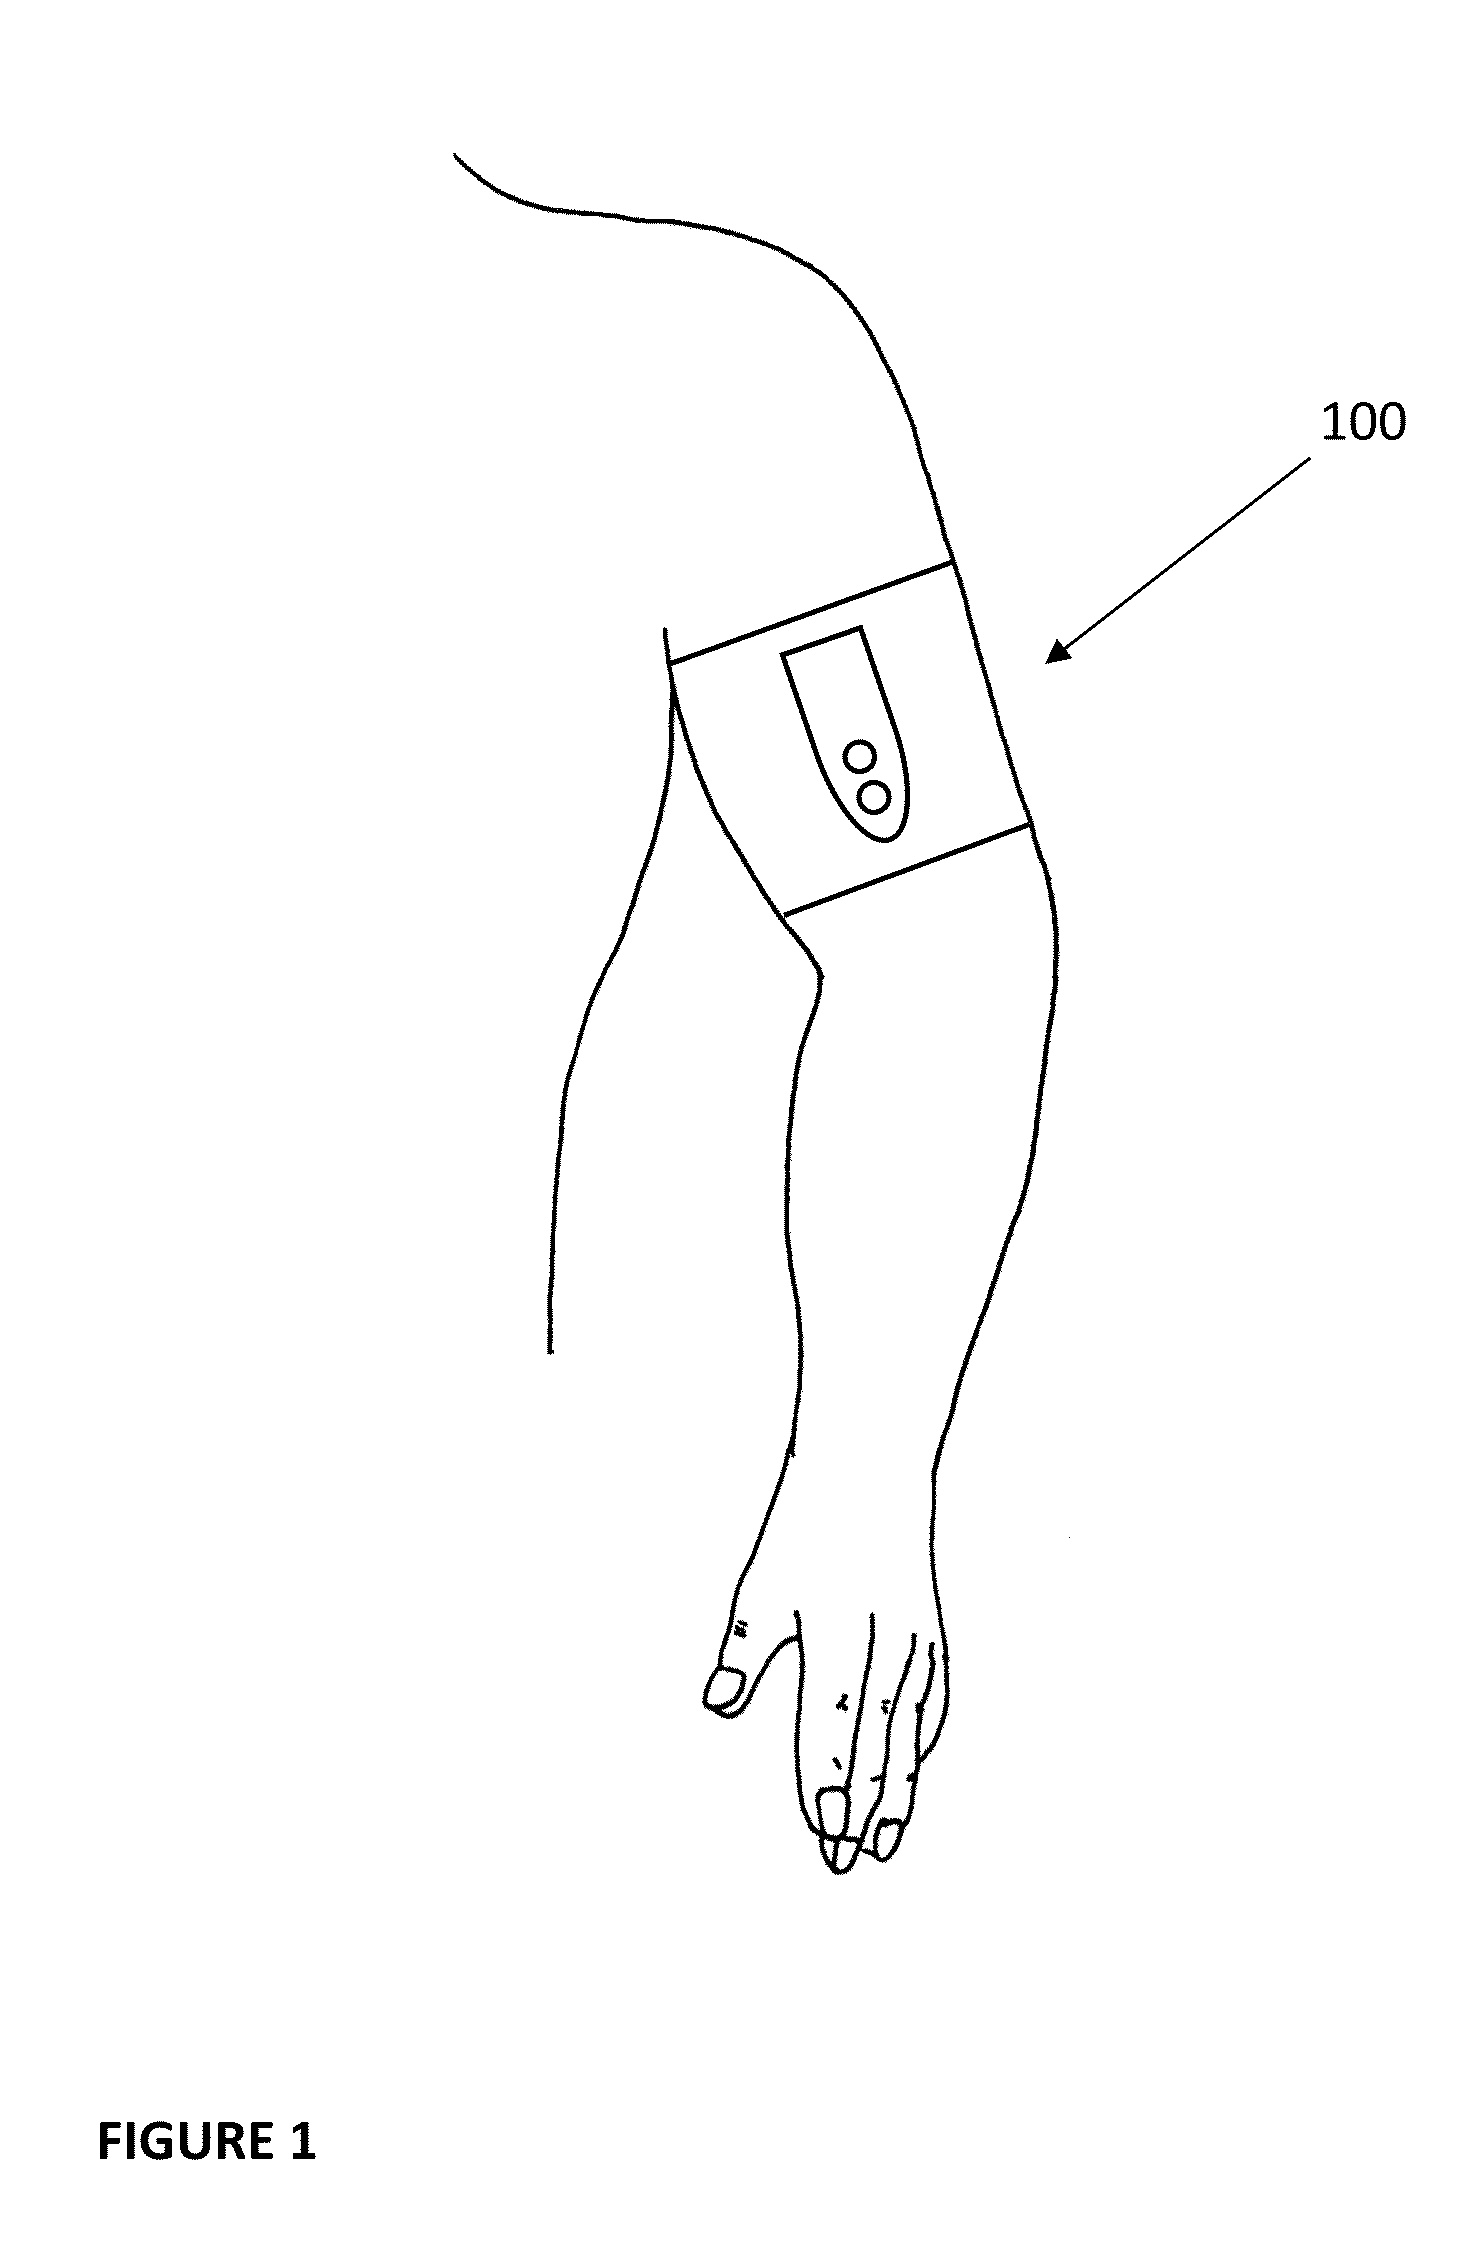 Multi-mode inflatable limb occlusion device